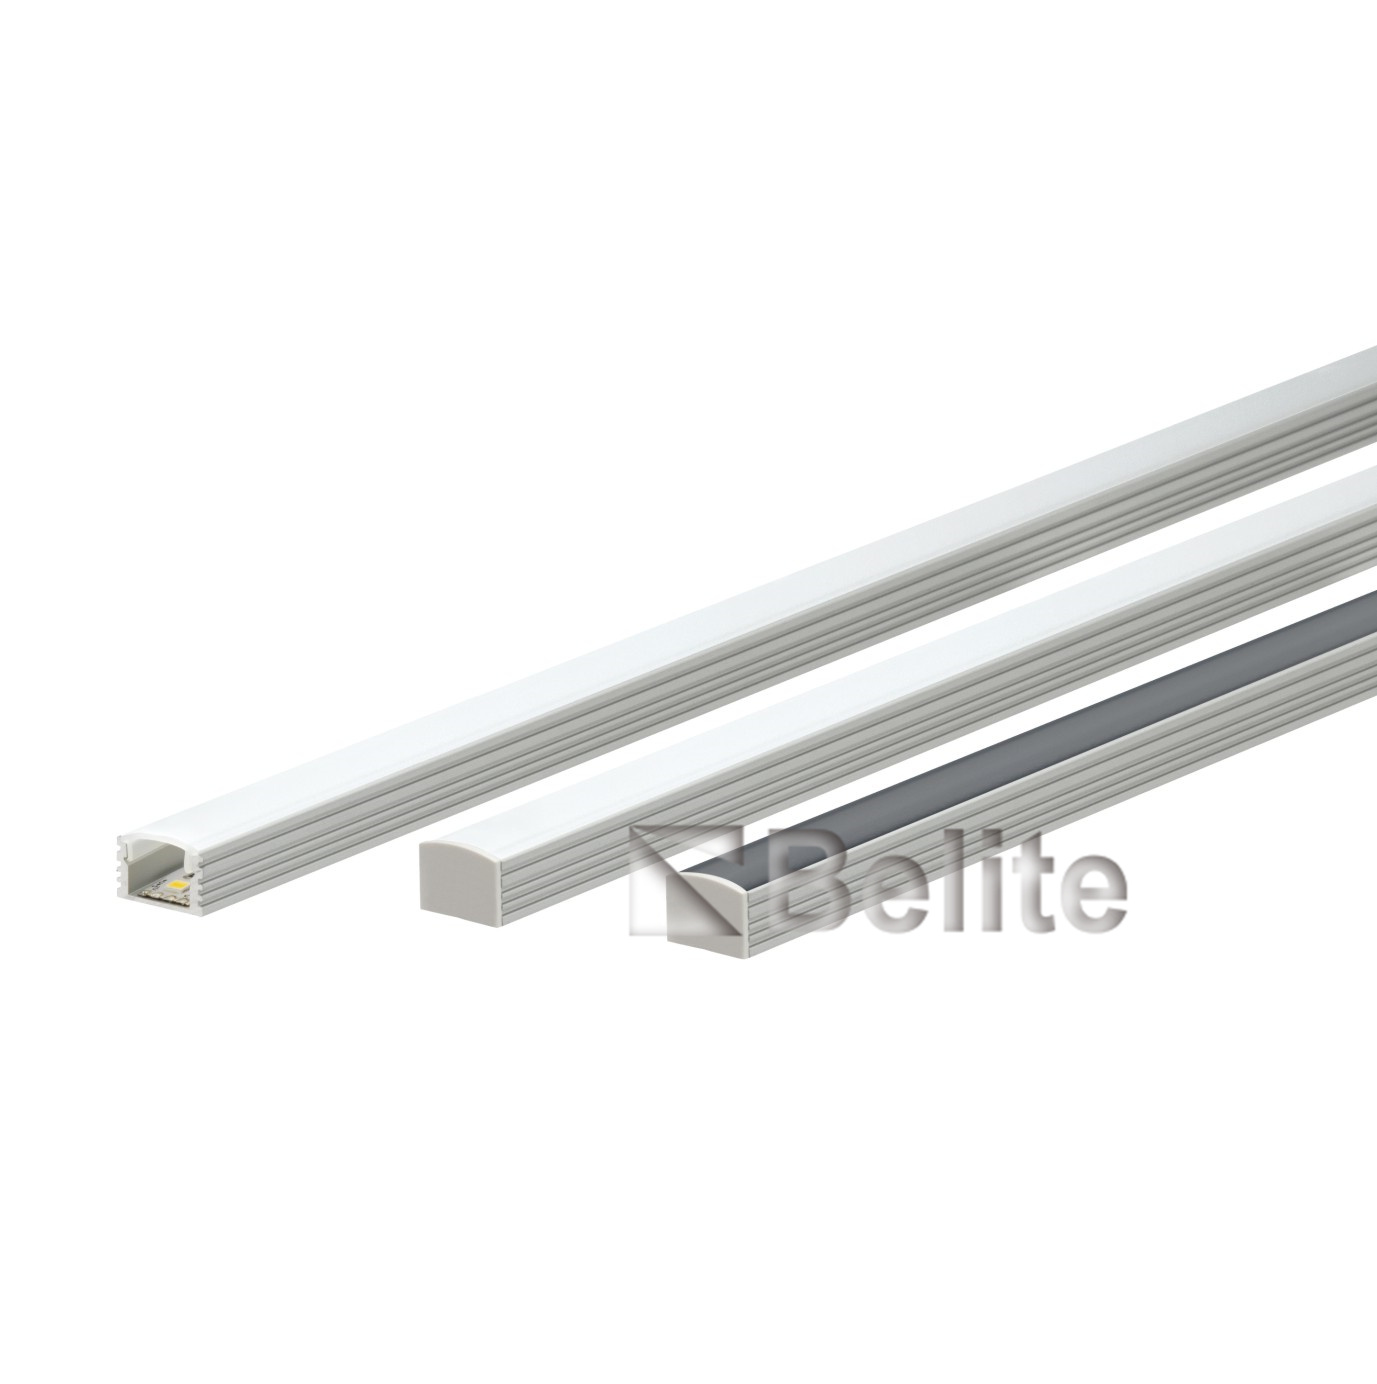 BELITE led linear light indoor high quality surface mounted modern style